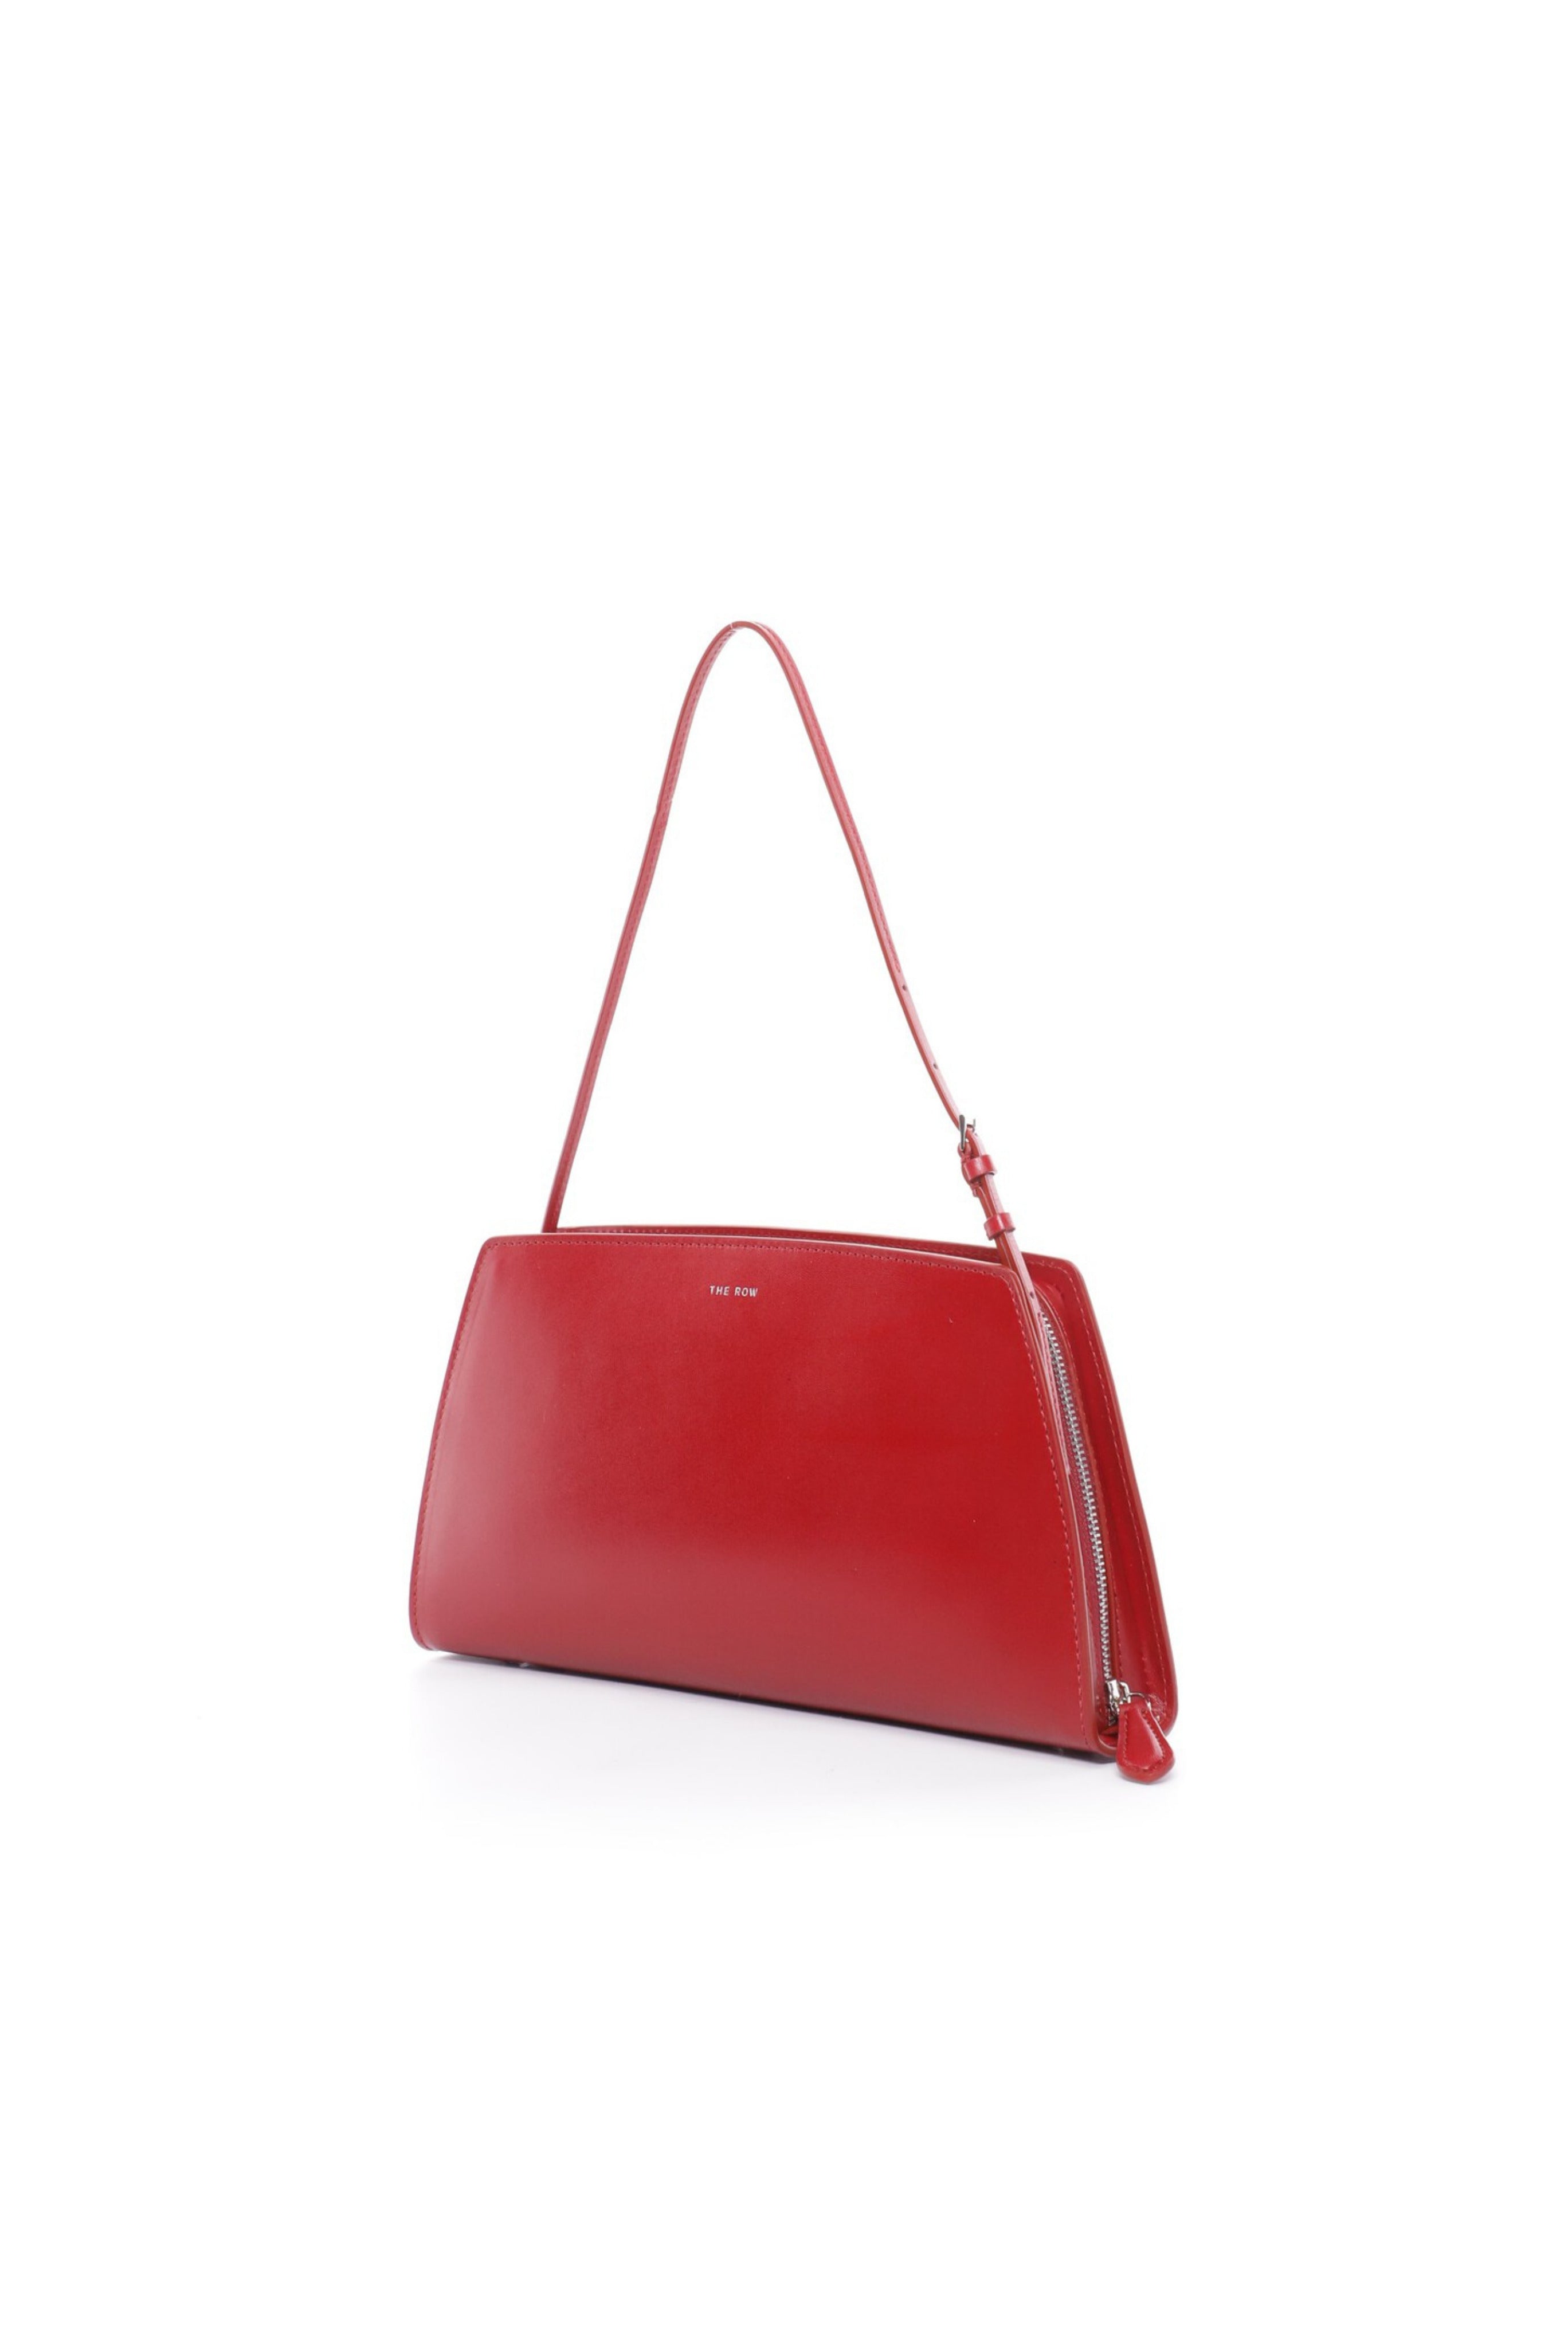 THE ROW Dalia Baguette in Red